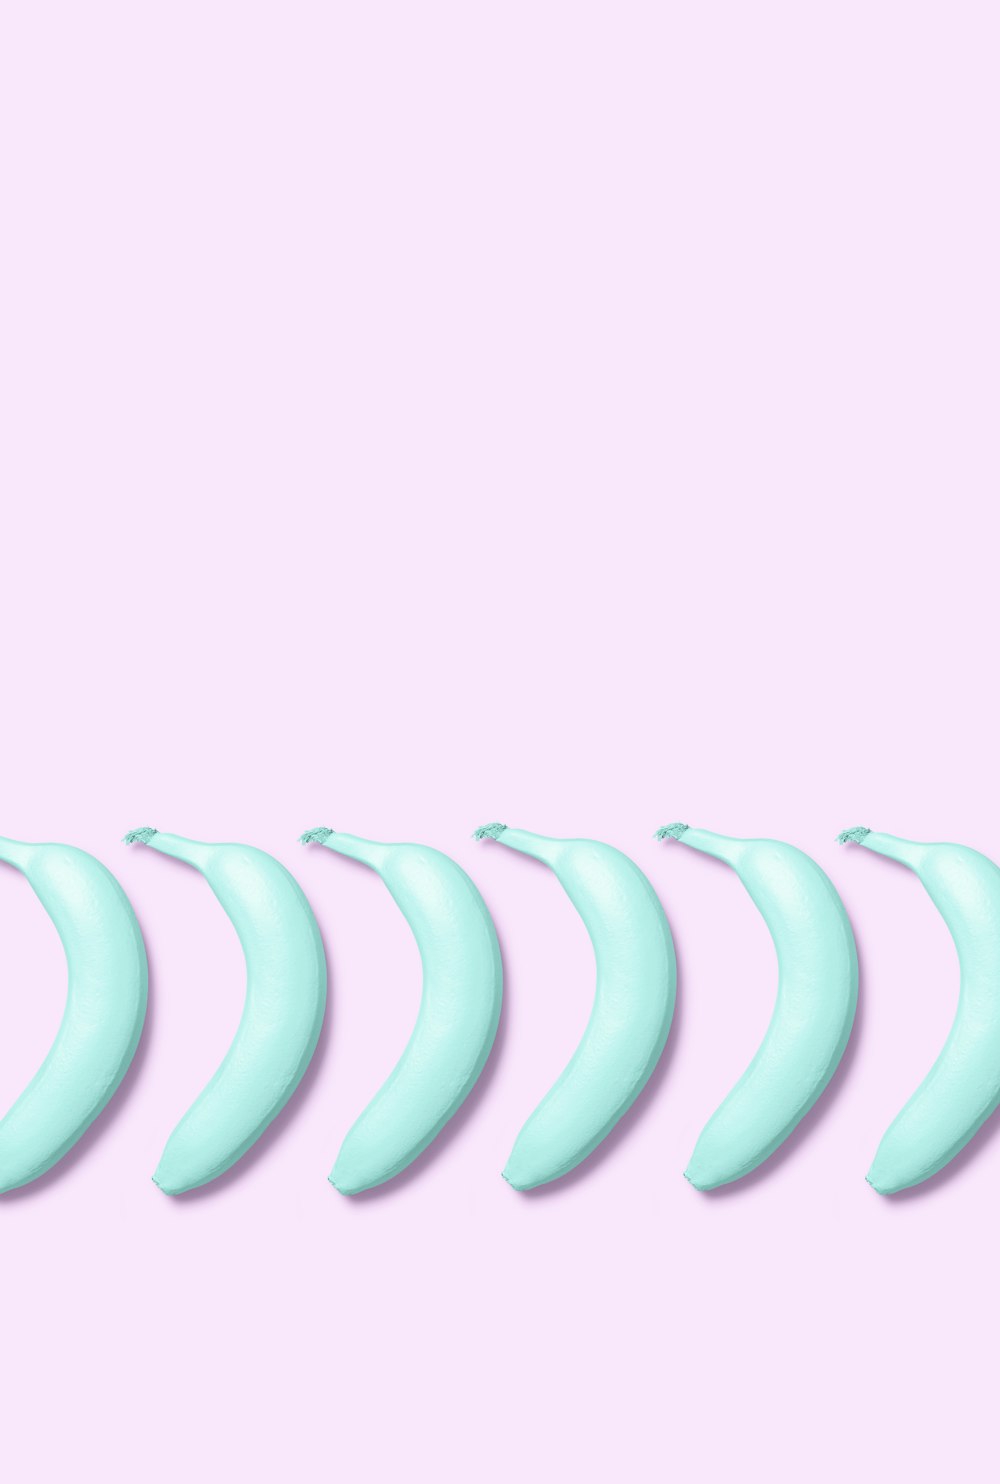 a row of blue bananas on a pink background